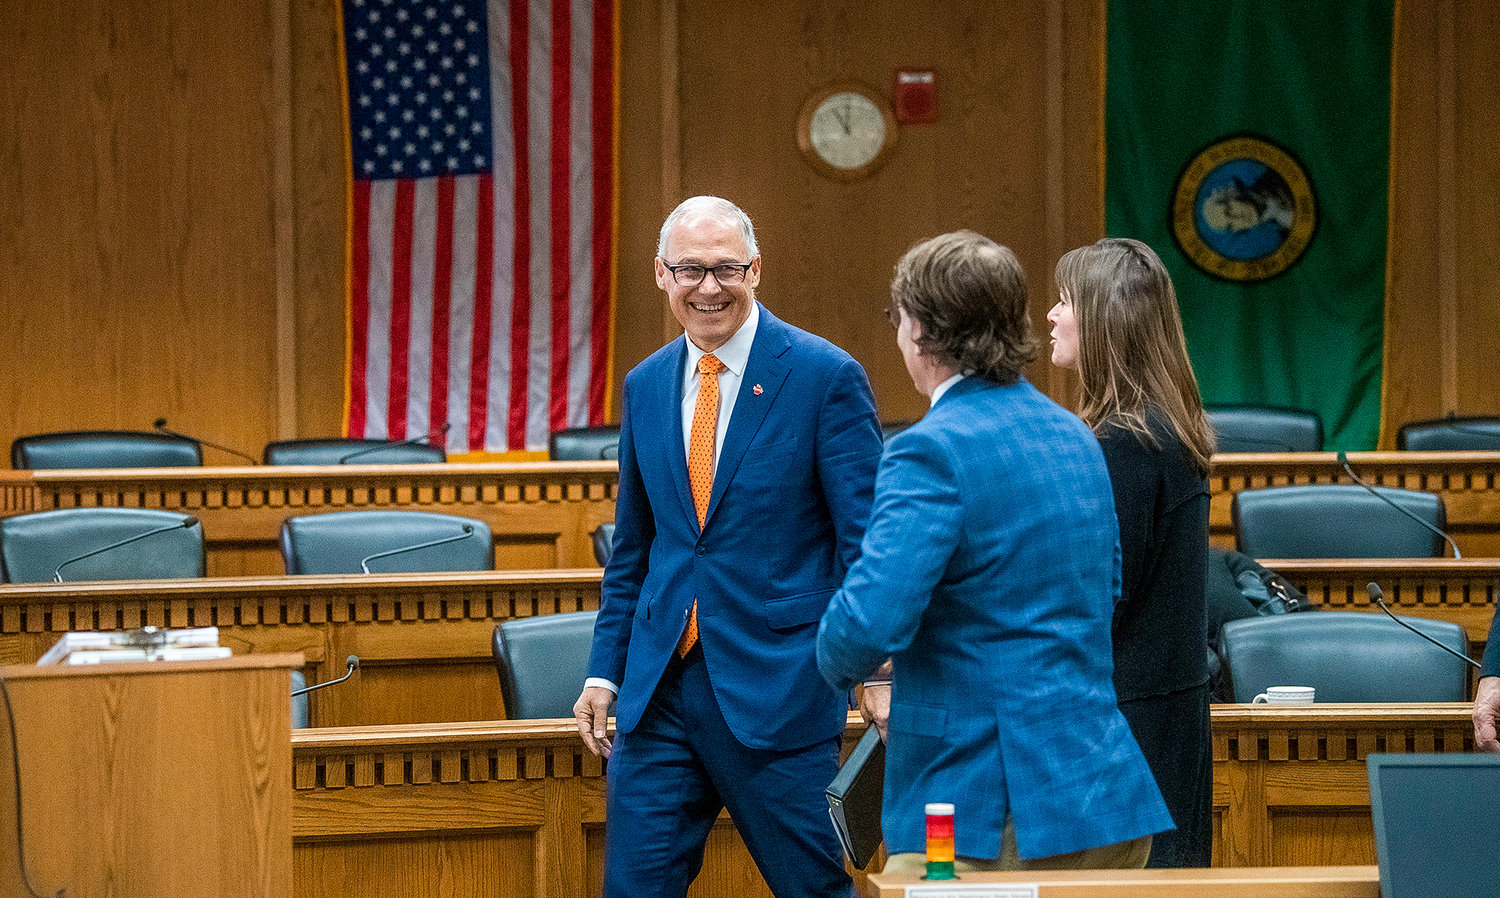 Governor Jay Inslee smiles before taking questions from members of the press on Thursday inside the John A. Cherberg Building in Olympia.